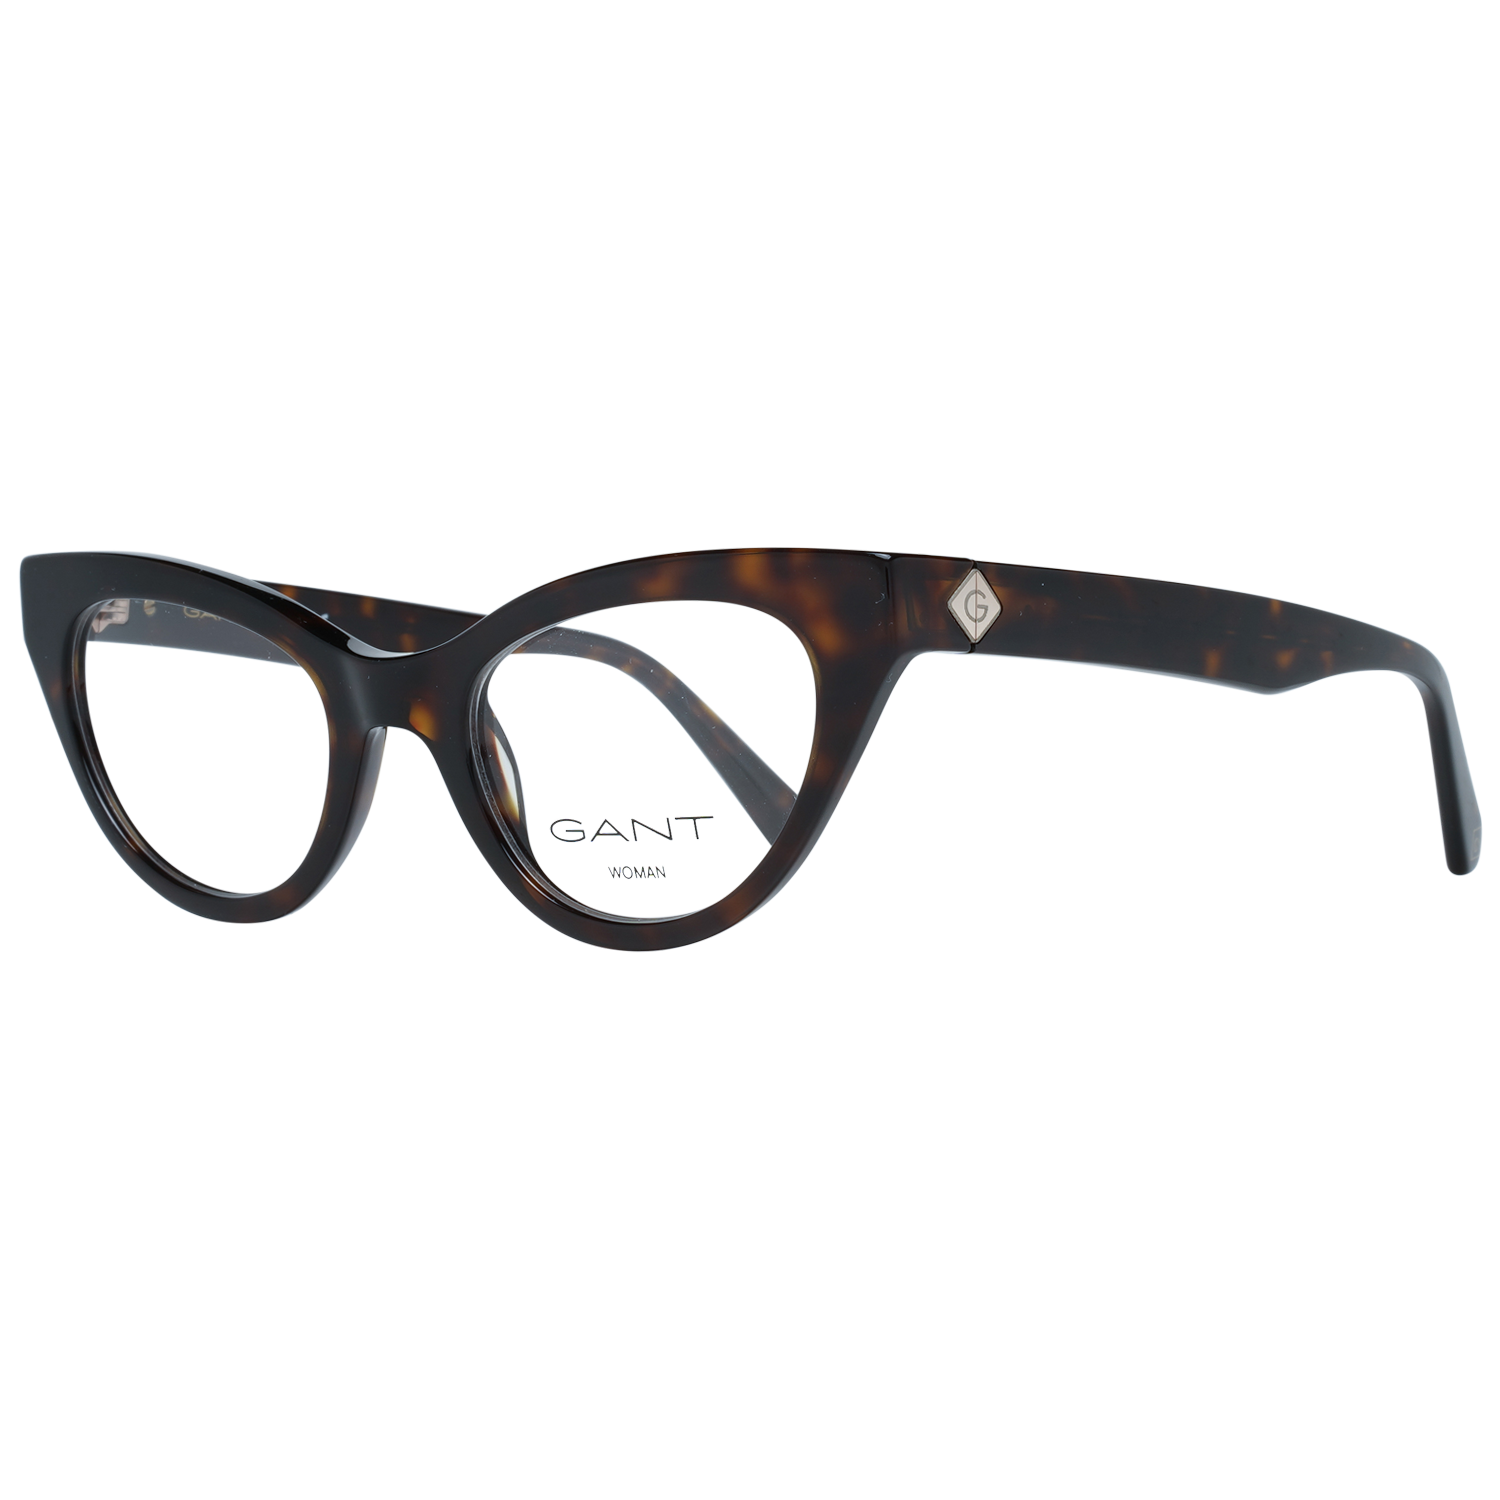 GenderWomenMain colorBrownFrame colorBrownFrame materialPlasticSize49-20-140Lenses width49mmLenses heigth34mmBridge length20mmFrame width136mmTemple length140mmShipment includesCase, Cleaning clothStyleFull-RimSpring hingeNo